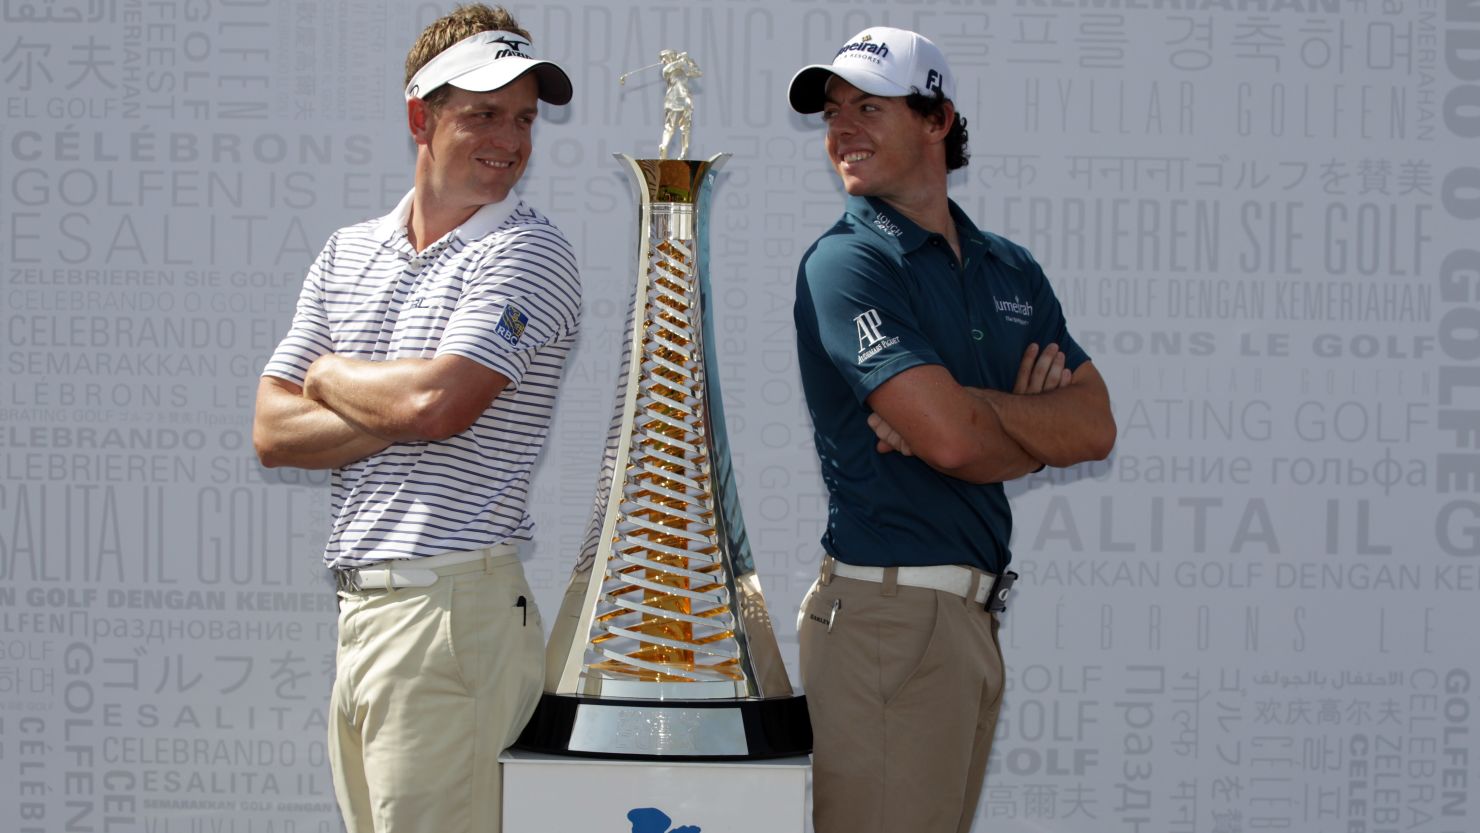 Luke Donald (left) and Rory McIlroy are all smiles ahead of this week's Dubai World Championship.